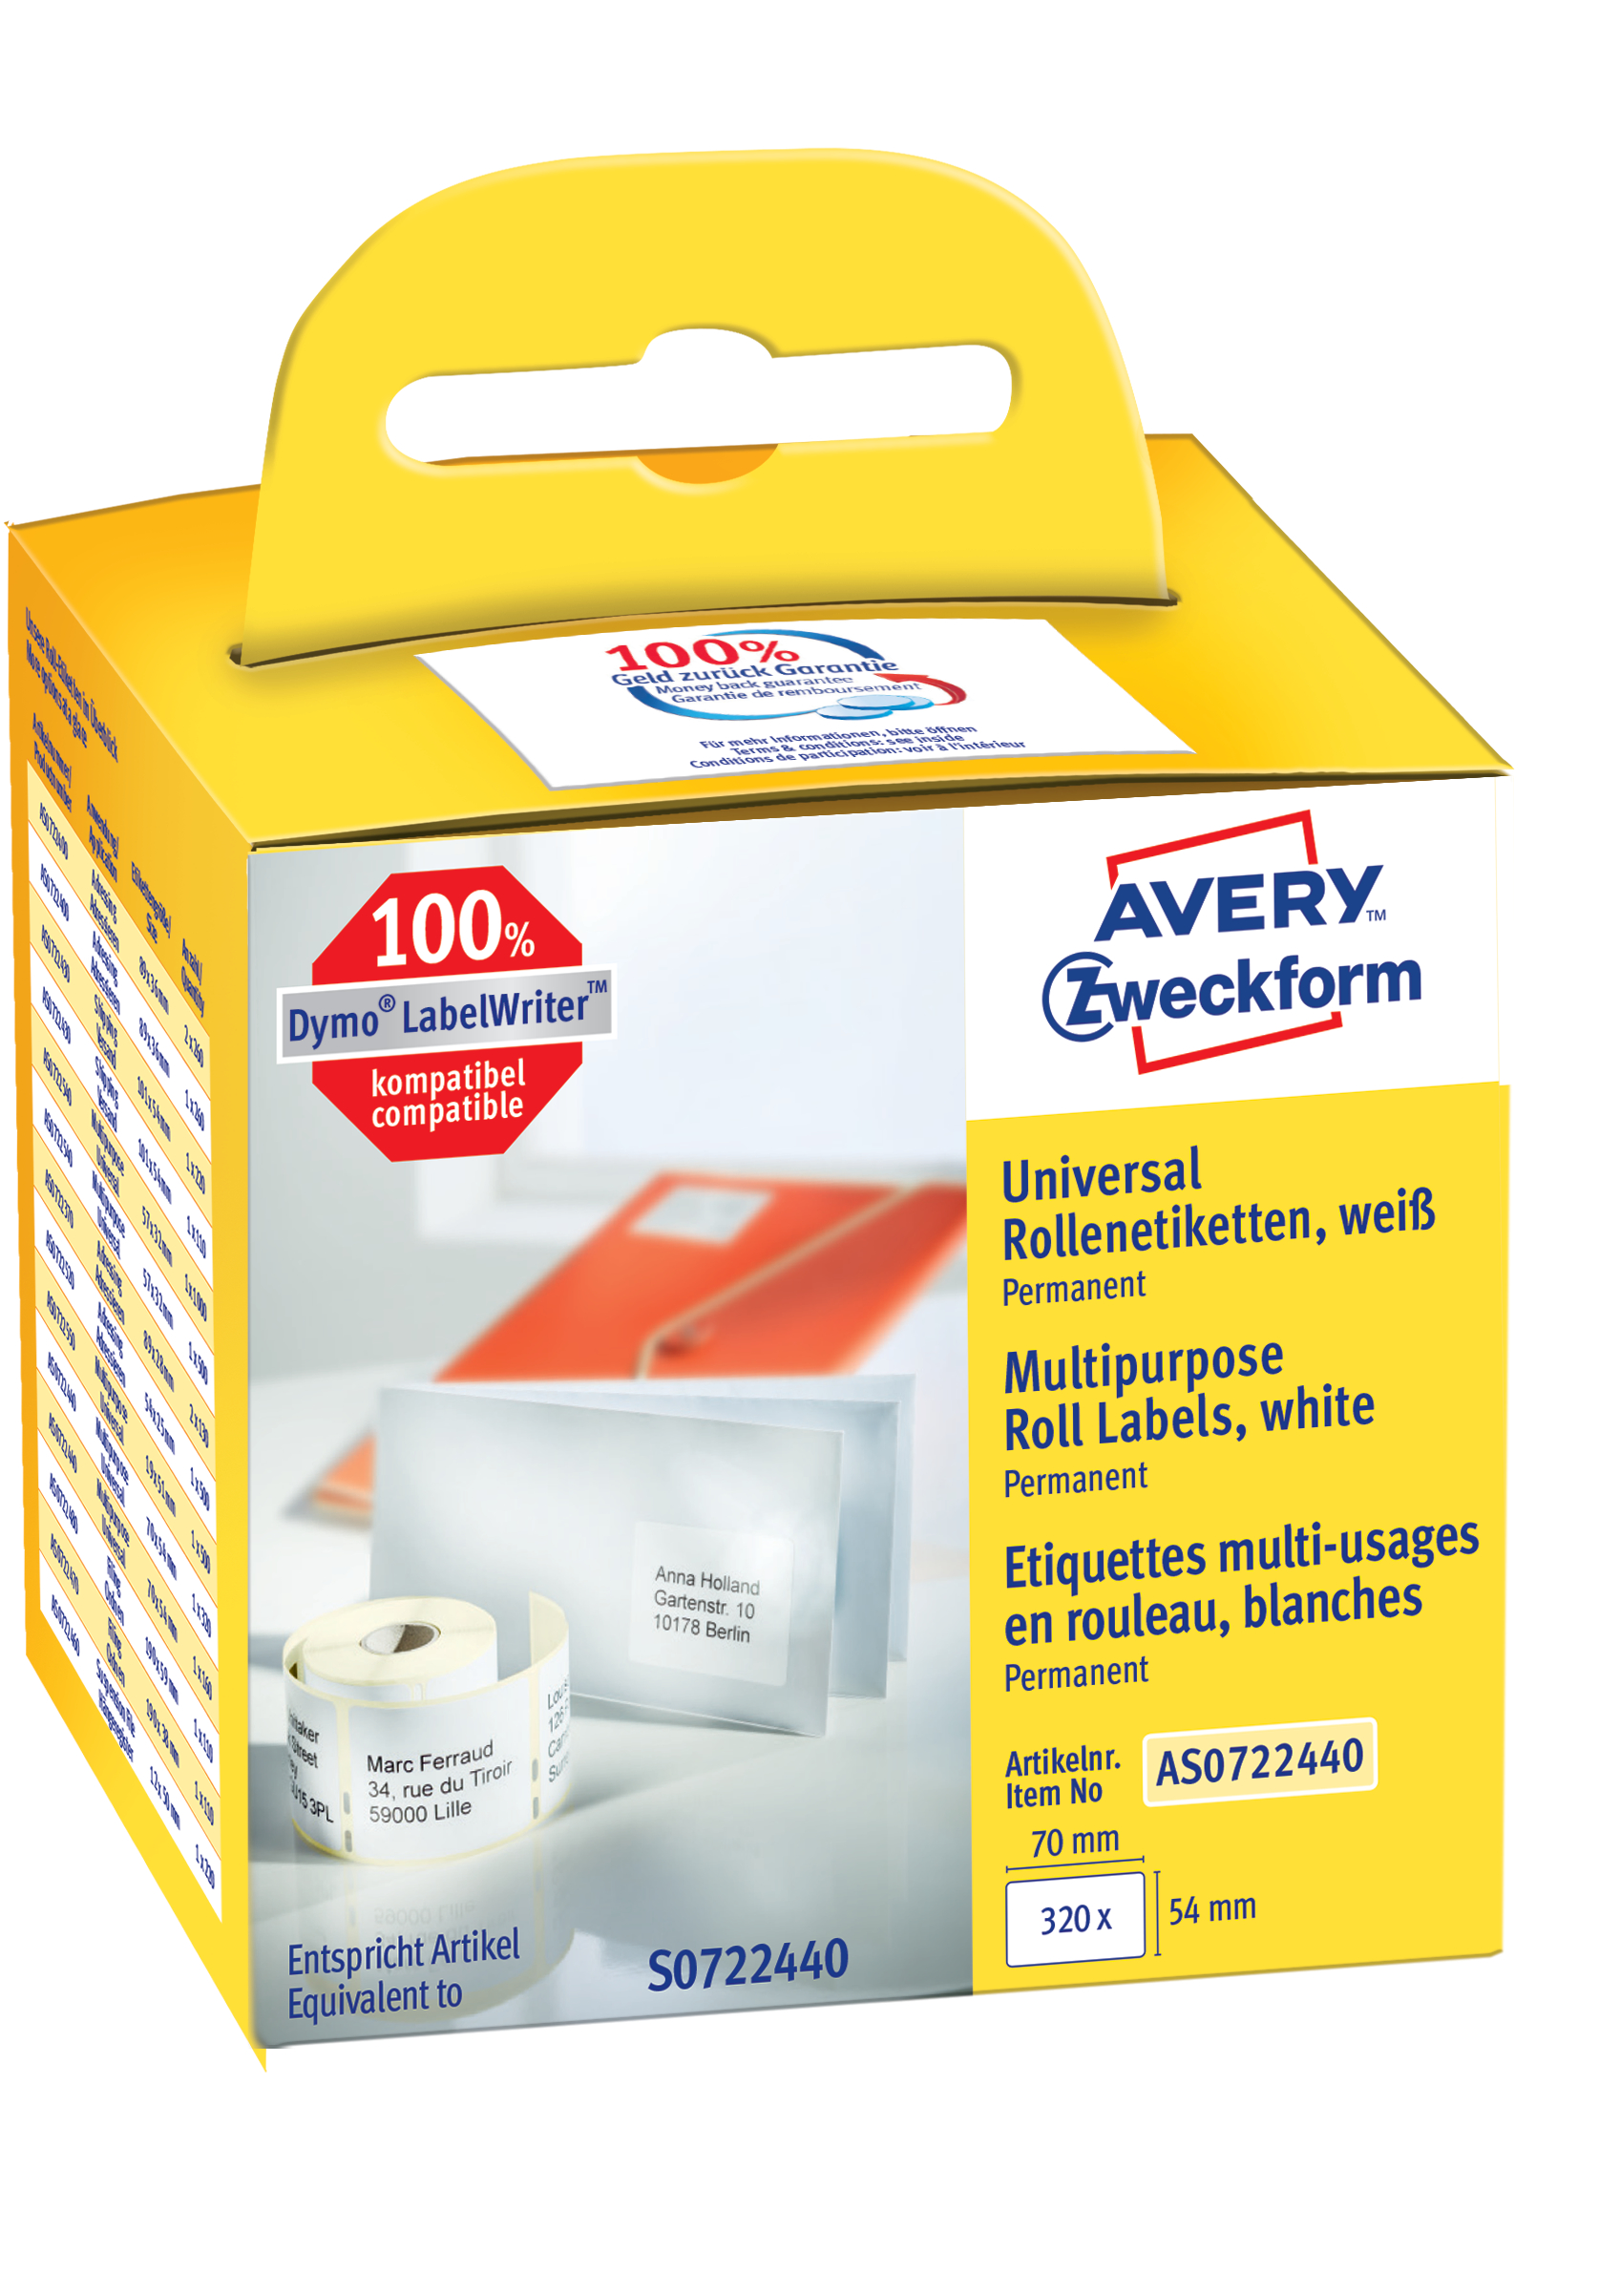 AVERY ZWECKFORM Etiquettes universell. 70x54mm AS0722440 blanc, rouleau 320 pcs.